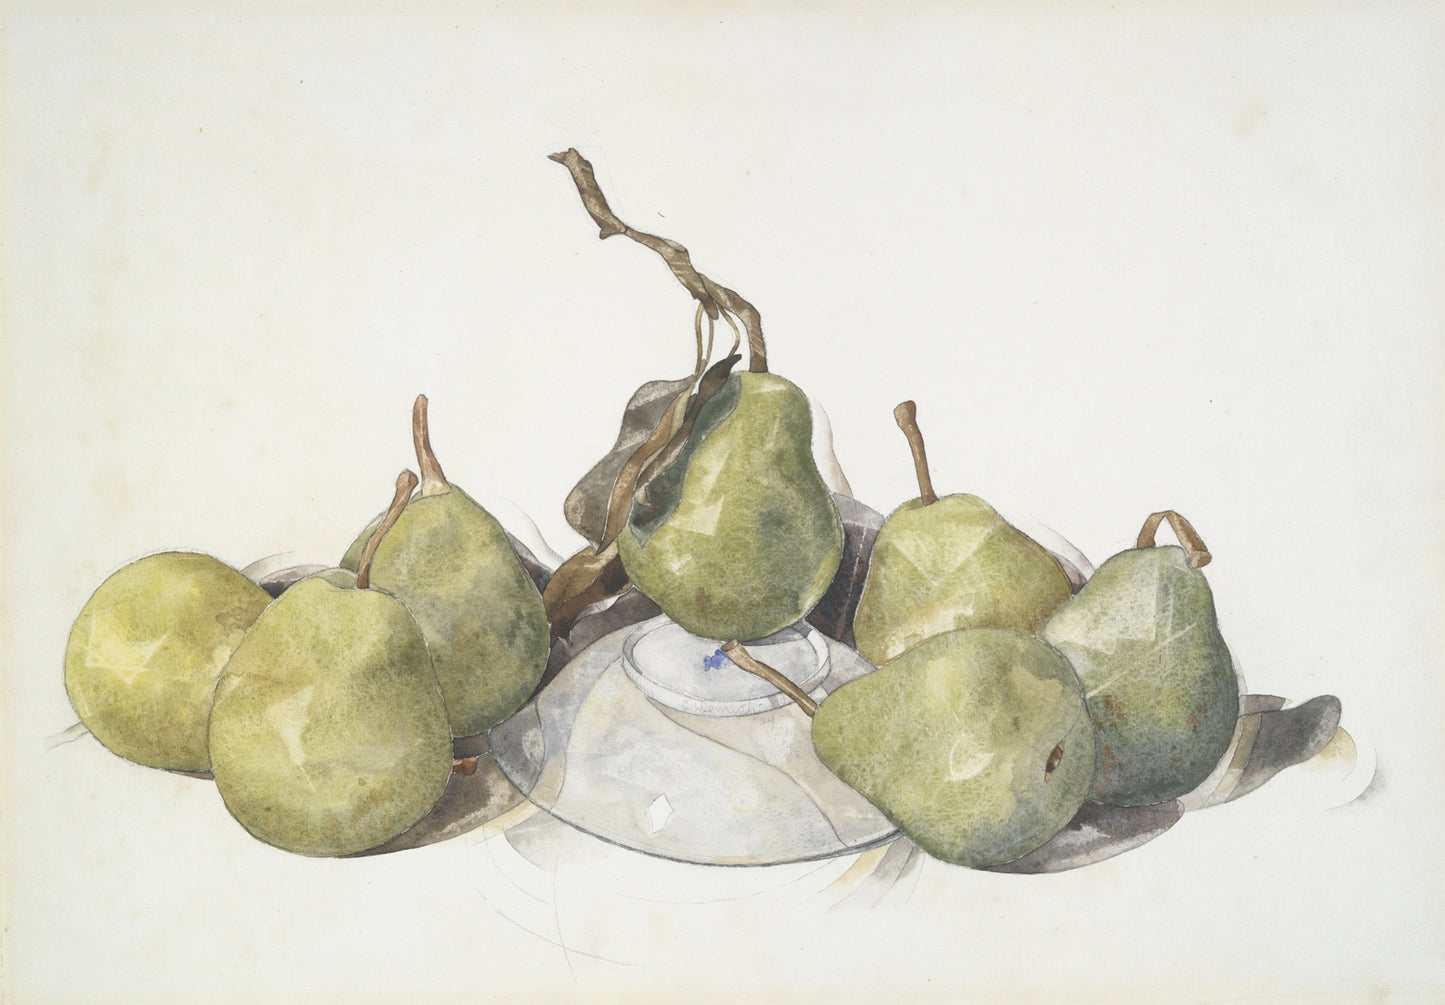 Pears artwork (1920s) | Charles Demuth Posters, Prints, & Visual Artwork The Trumpet Shop   